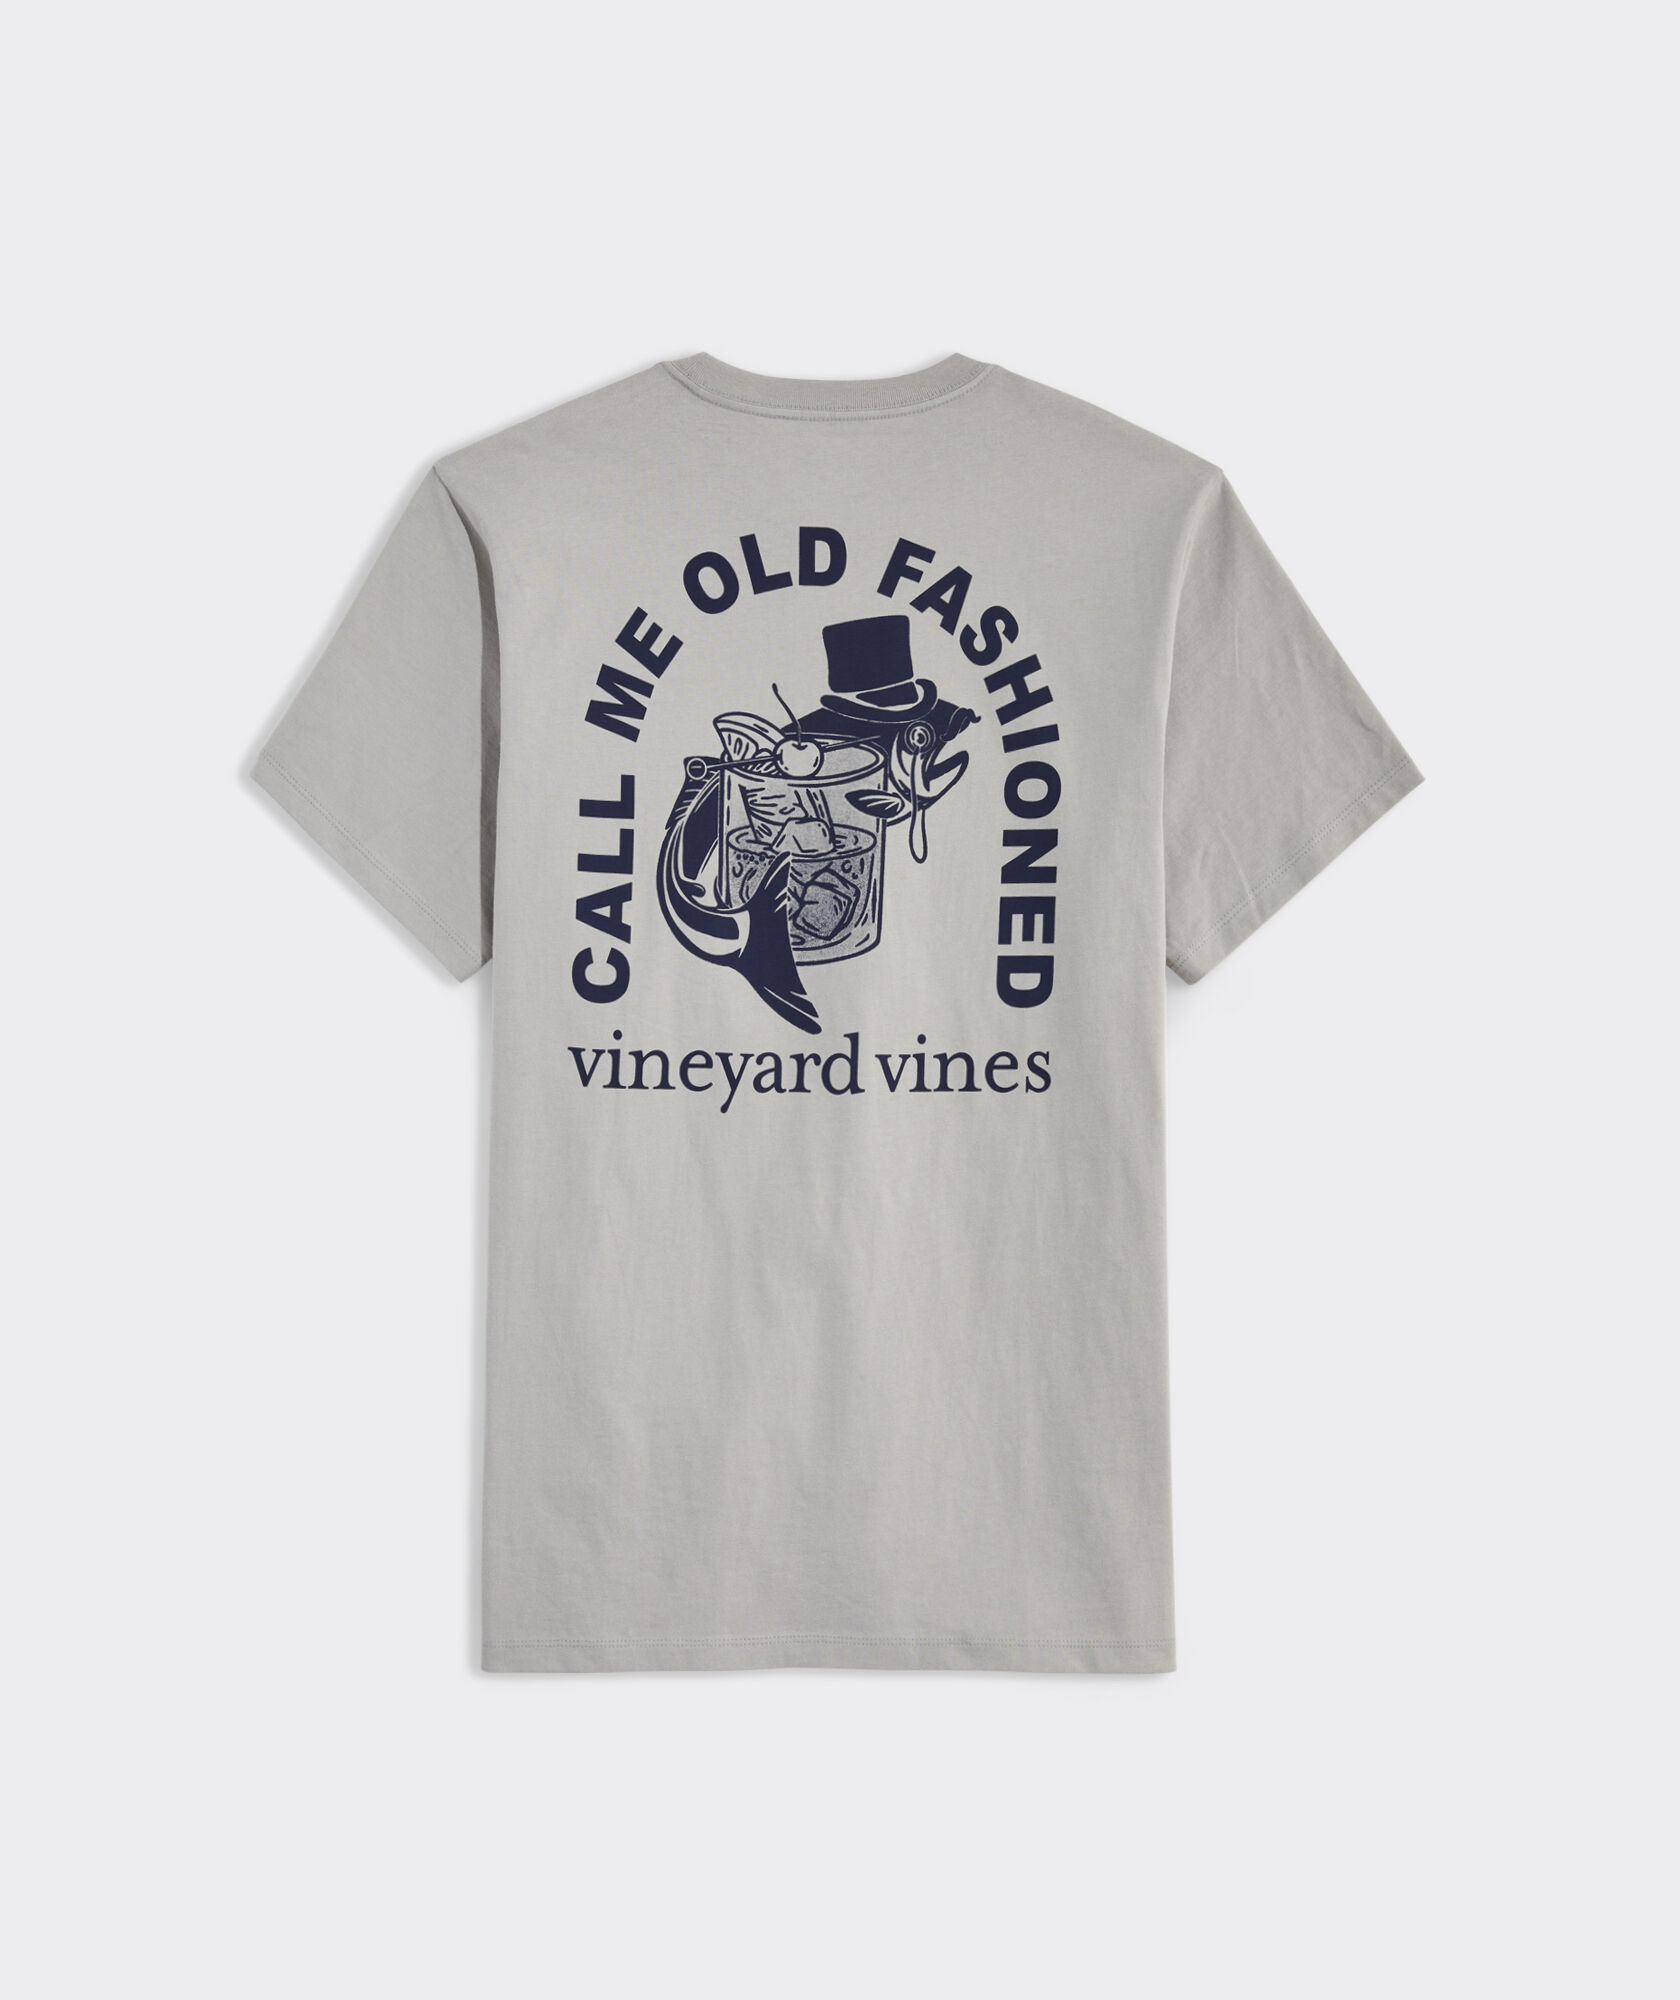 Call Me Old Fashioned Short-Sleeve Tee